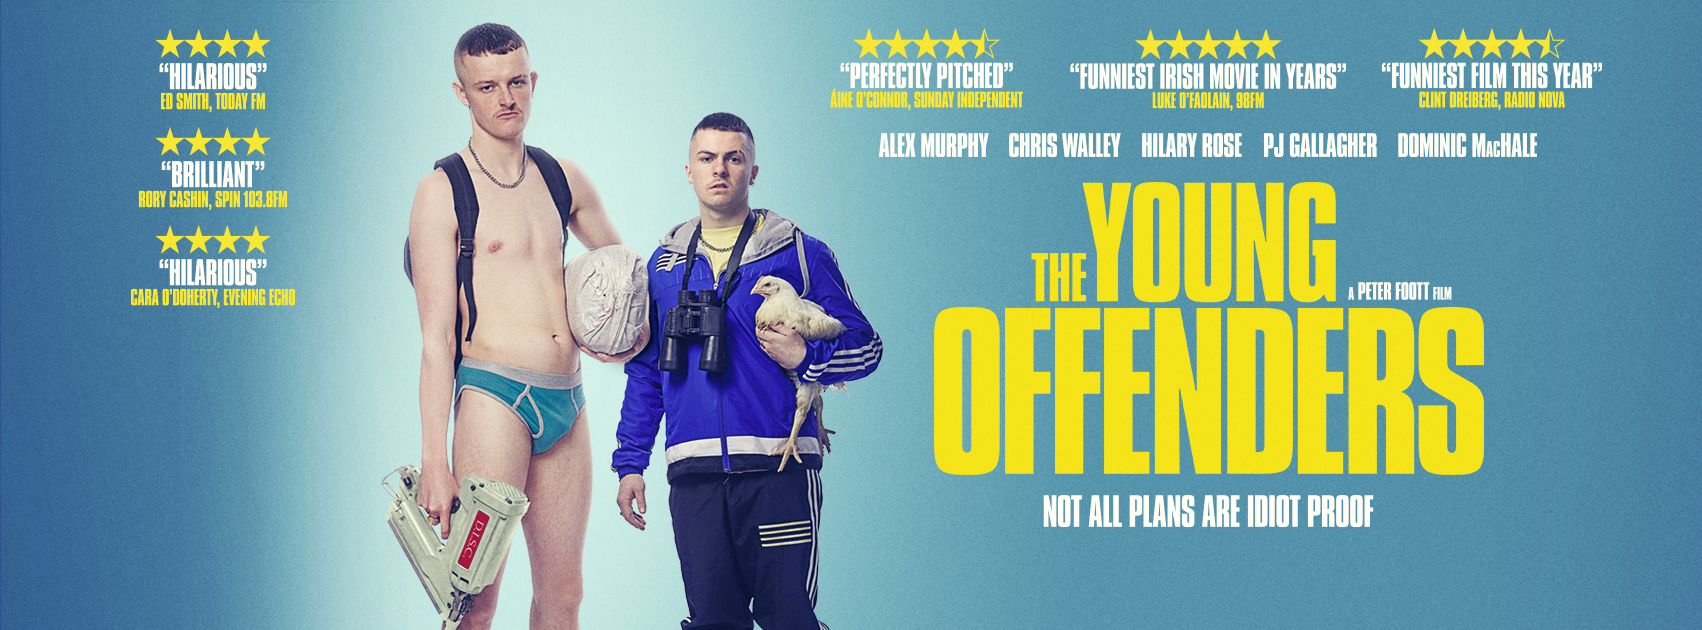 The Young Offenders - Banner